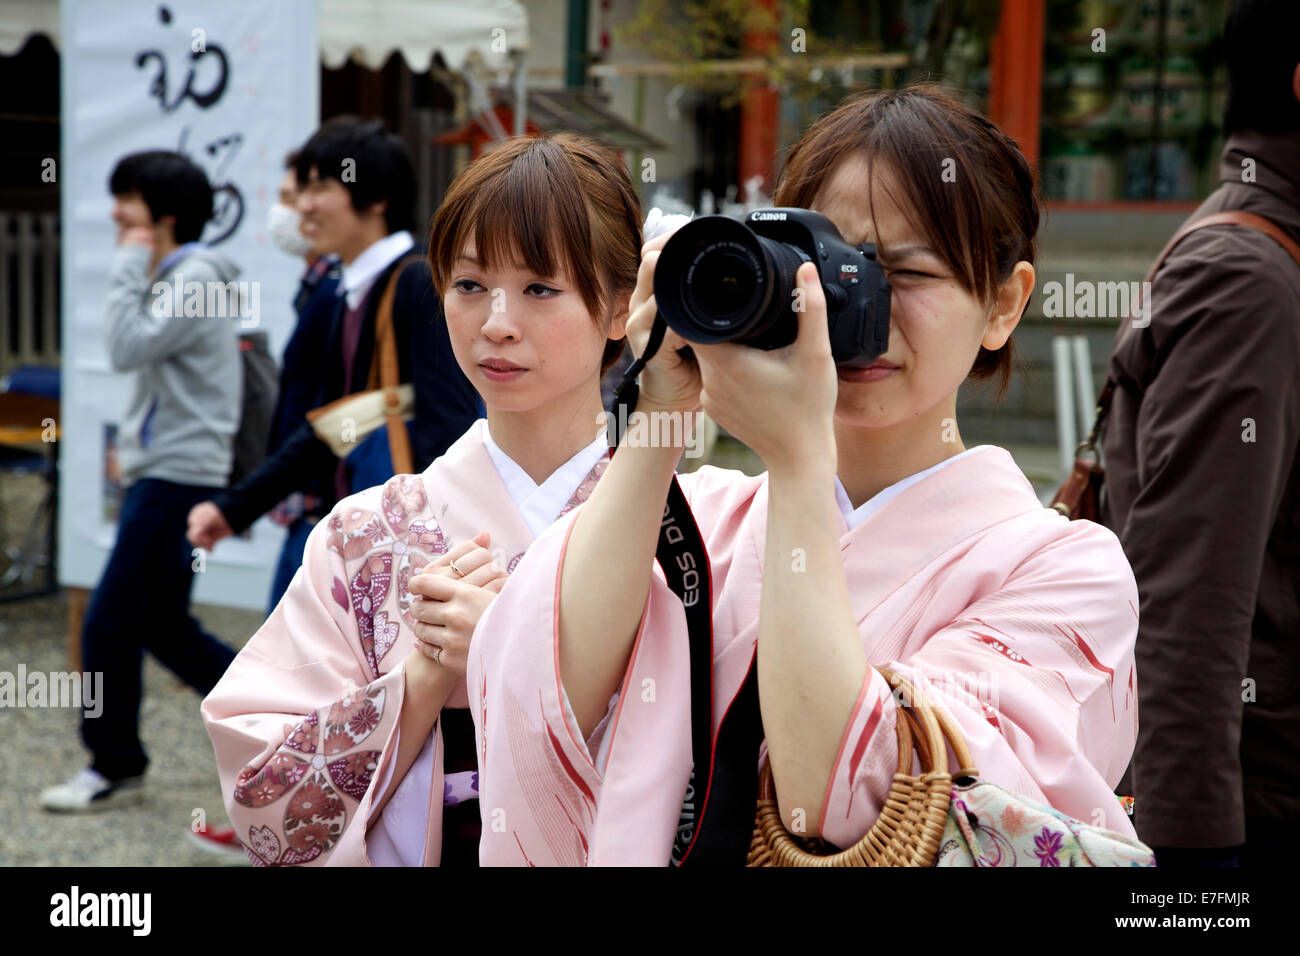 Japanese girls dressed with yukata, traditional dress, and taking pictures with Canon camera. Kyoto, Japan, Asia Stock Photo